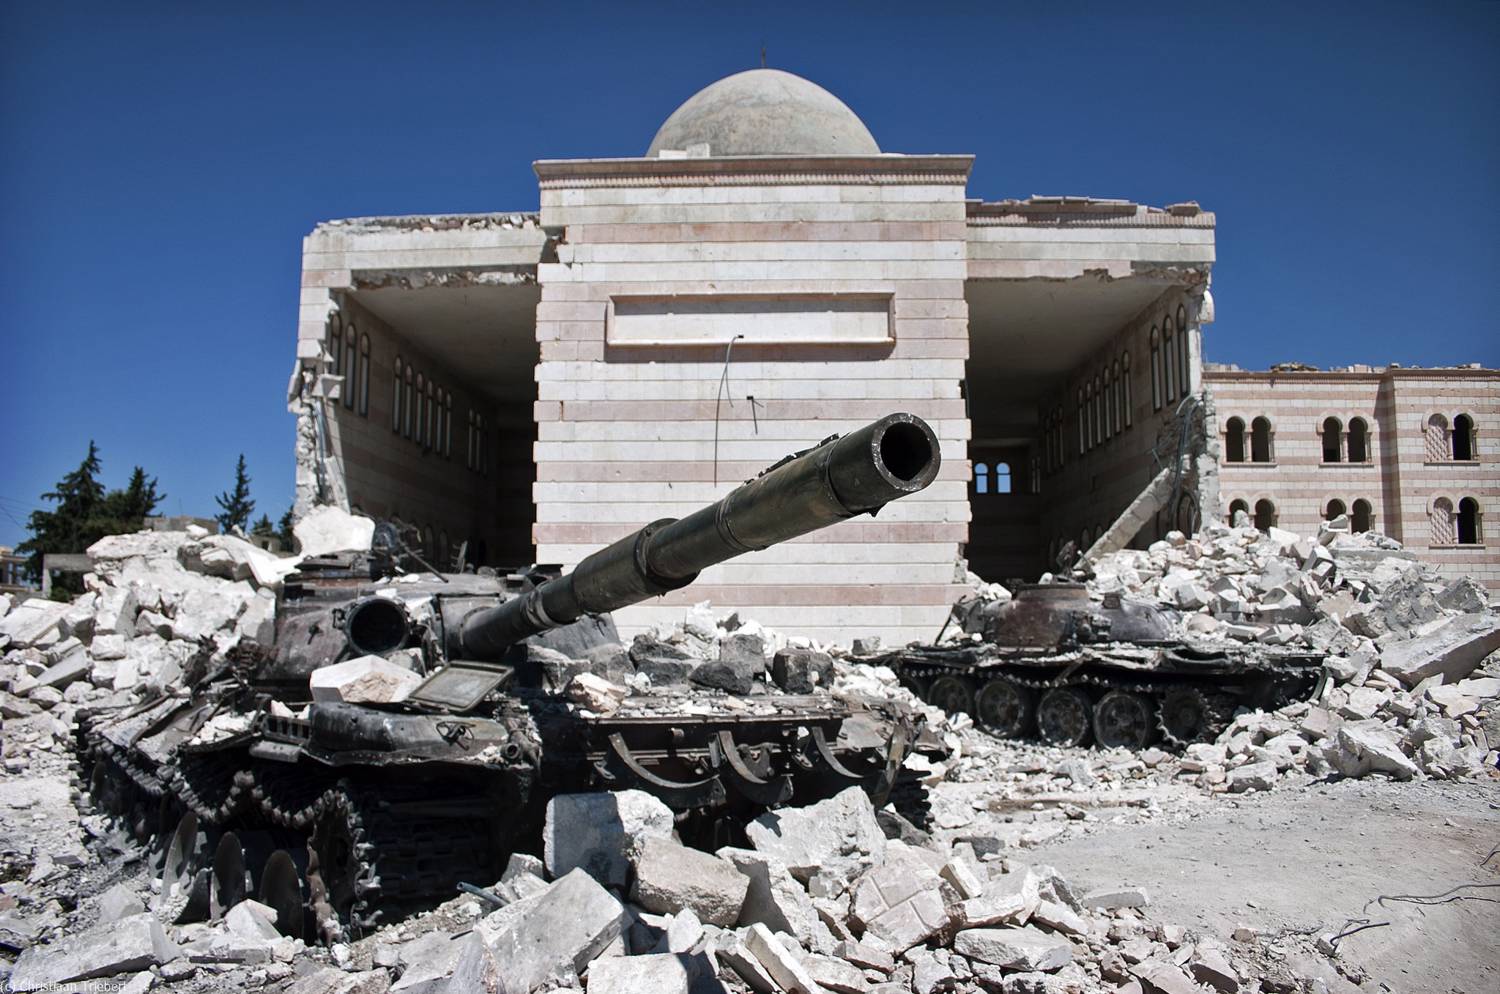 Destroyed tanks in front of a mosque in Azaz, Syria. From March 6 to July 23, a battle between the Free Syrian Army (FSA) and the Syrian Arab Army (SAA) was fought for control over the city of Azaz, north of Aleppo, during the Syrian civil war. Christiaan Triebert / Flickr